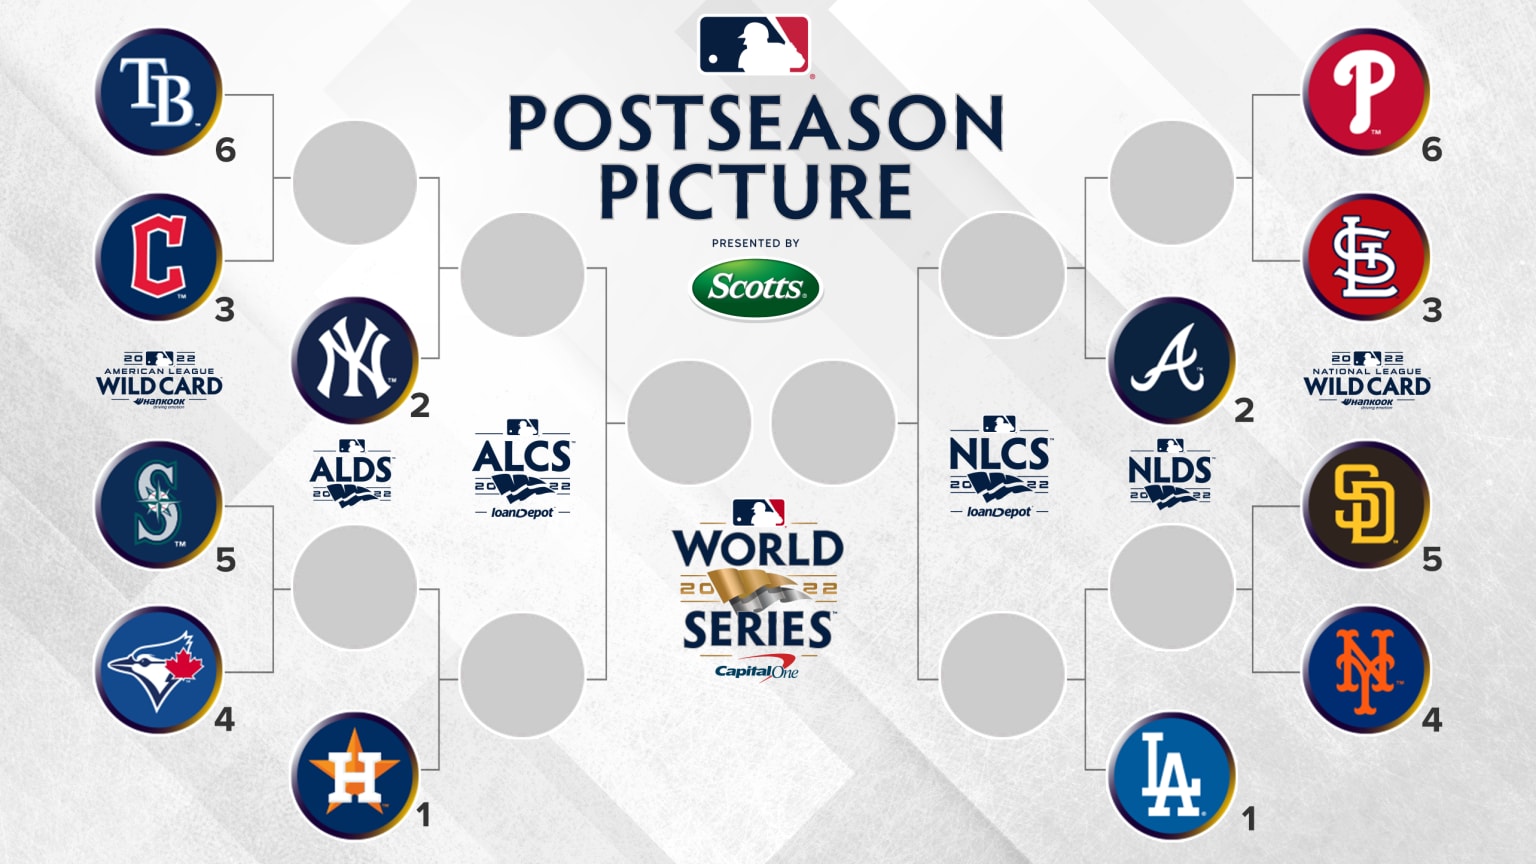 A bracket displaying the postseason matchups. Teams are represented in circles by their logos